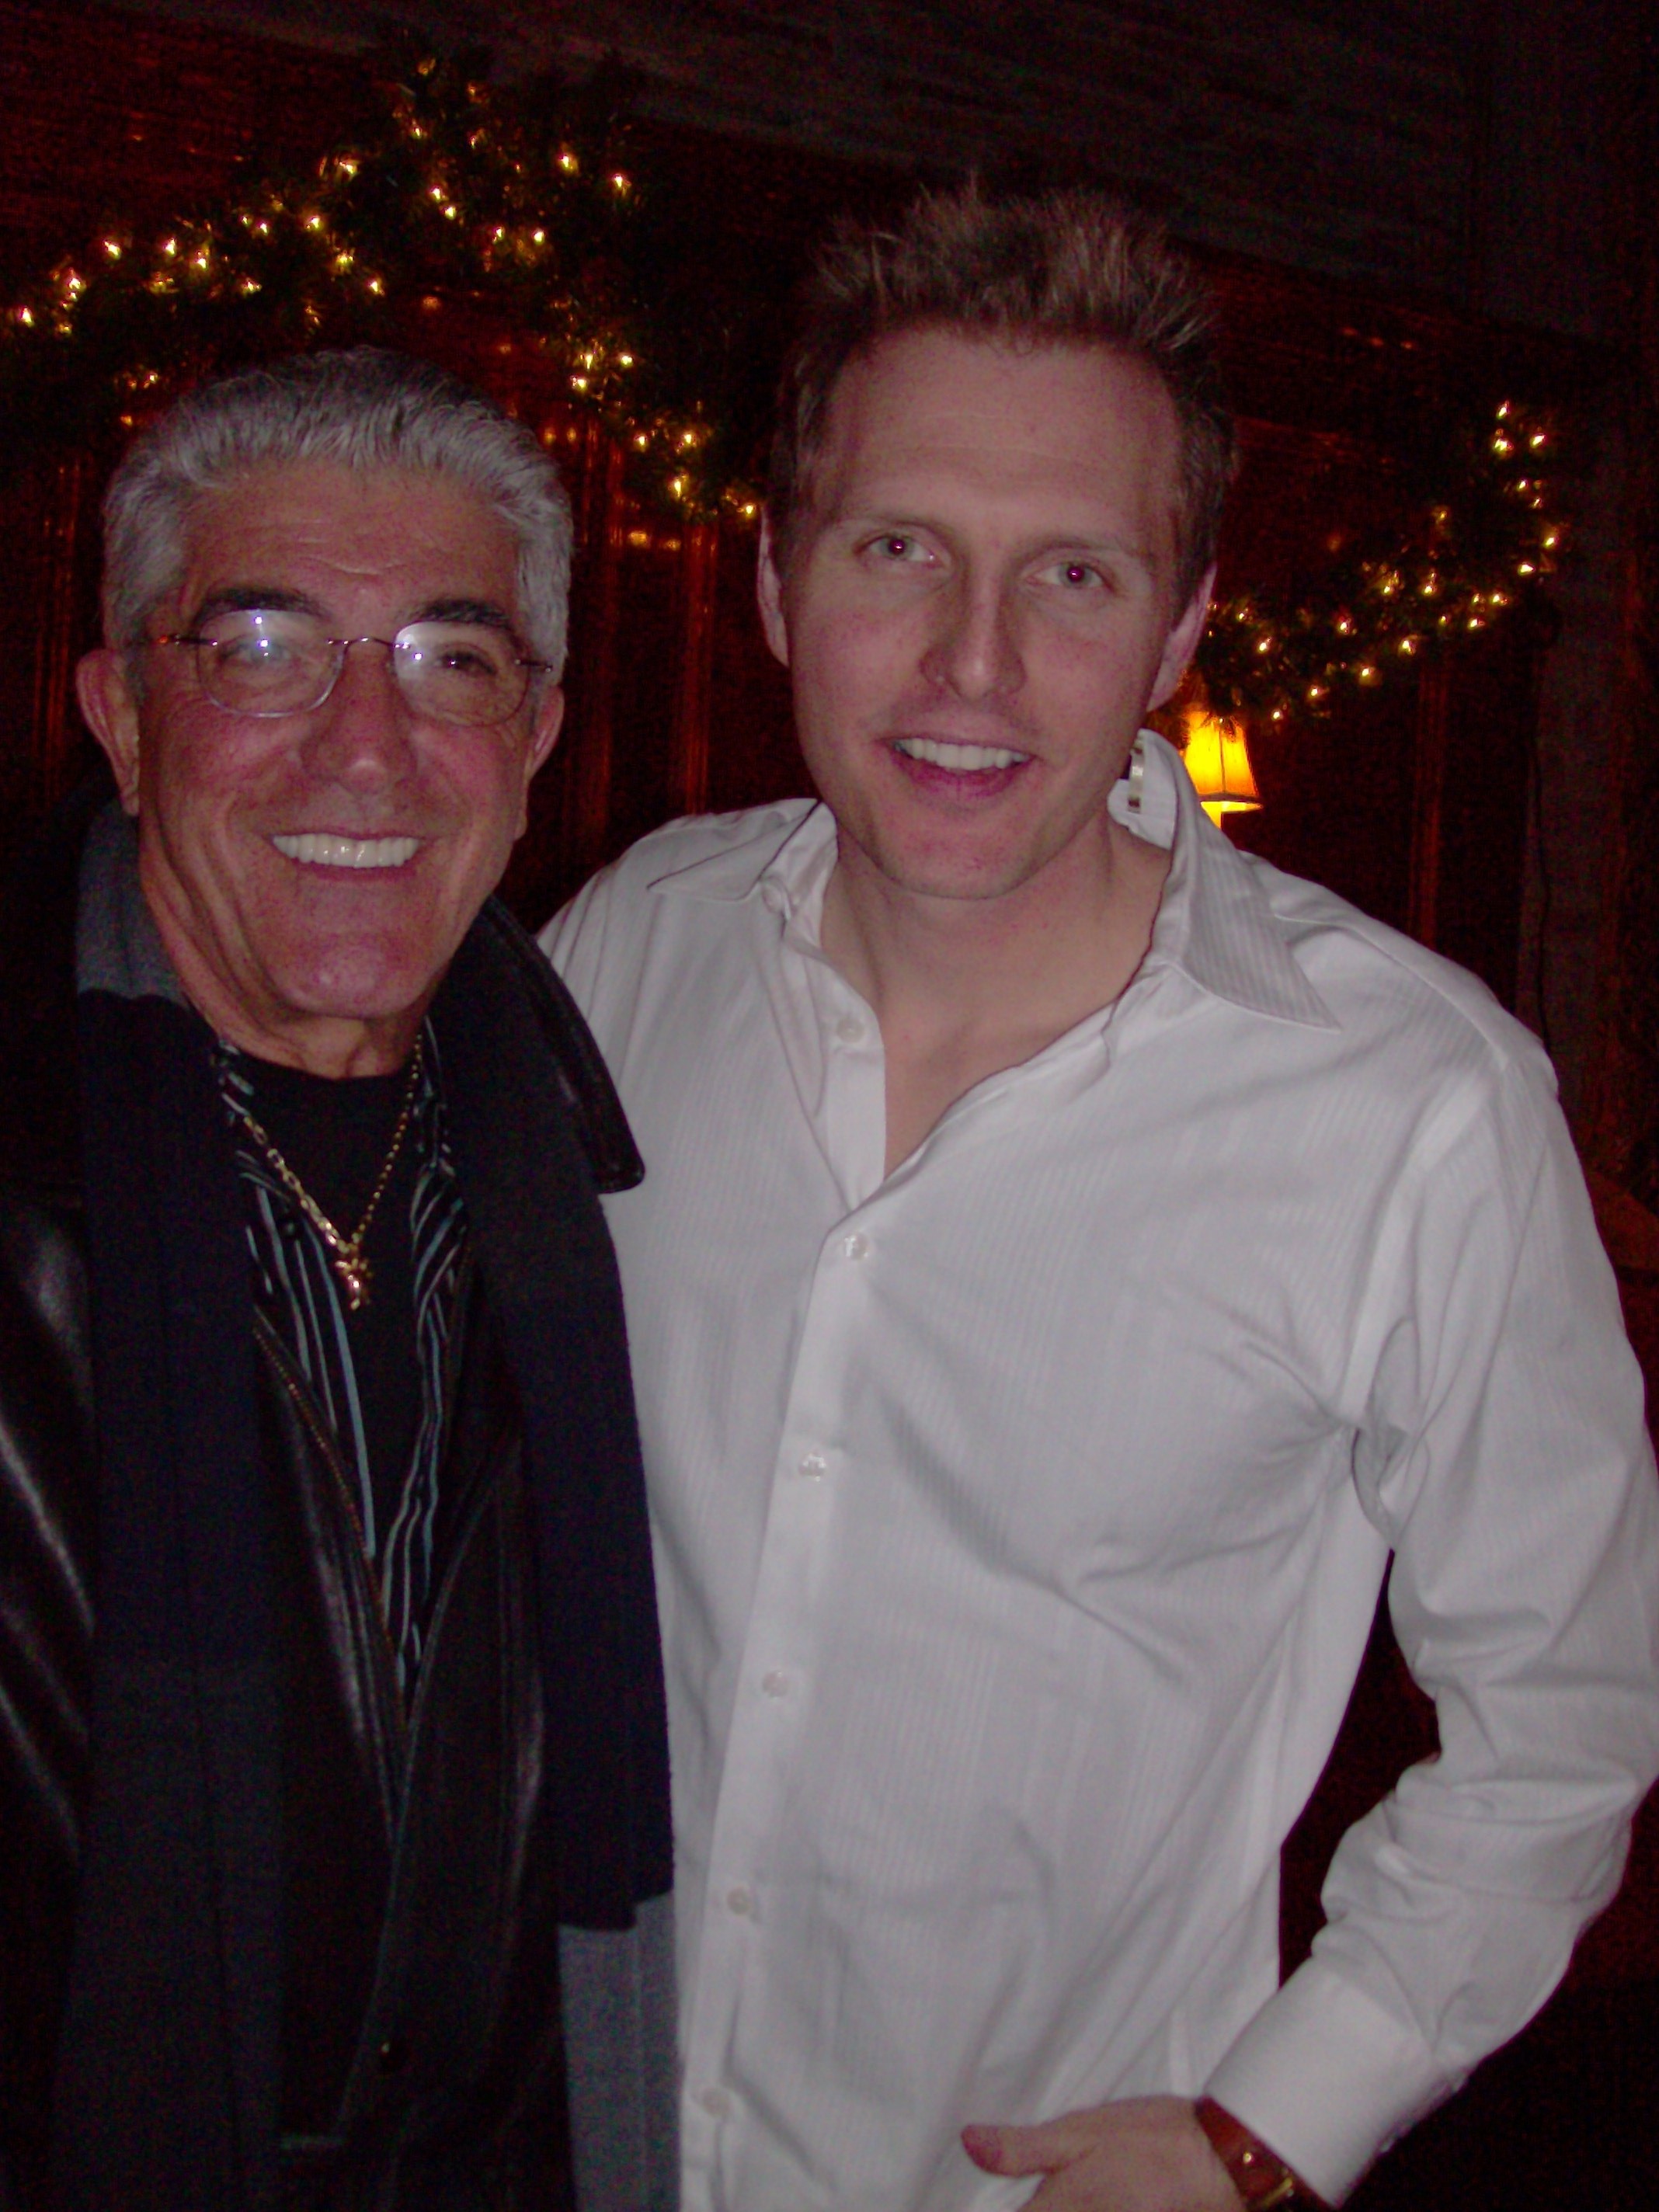 Frank Vincent and Barret Walz at the 